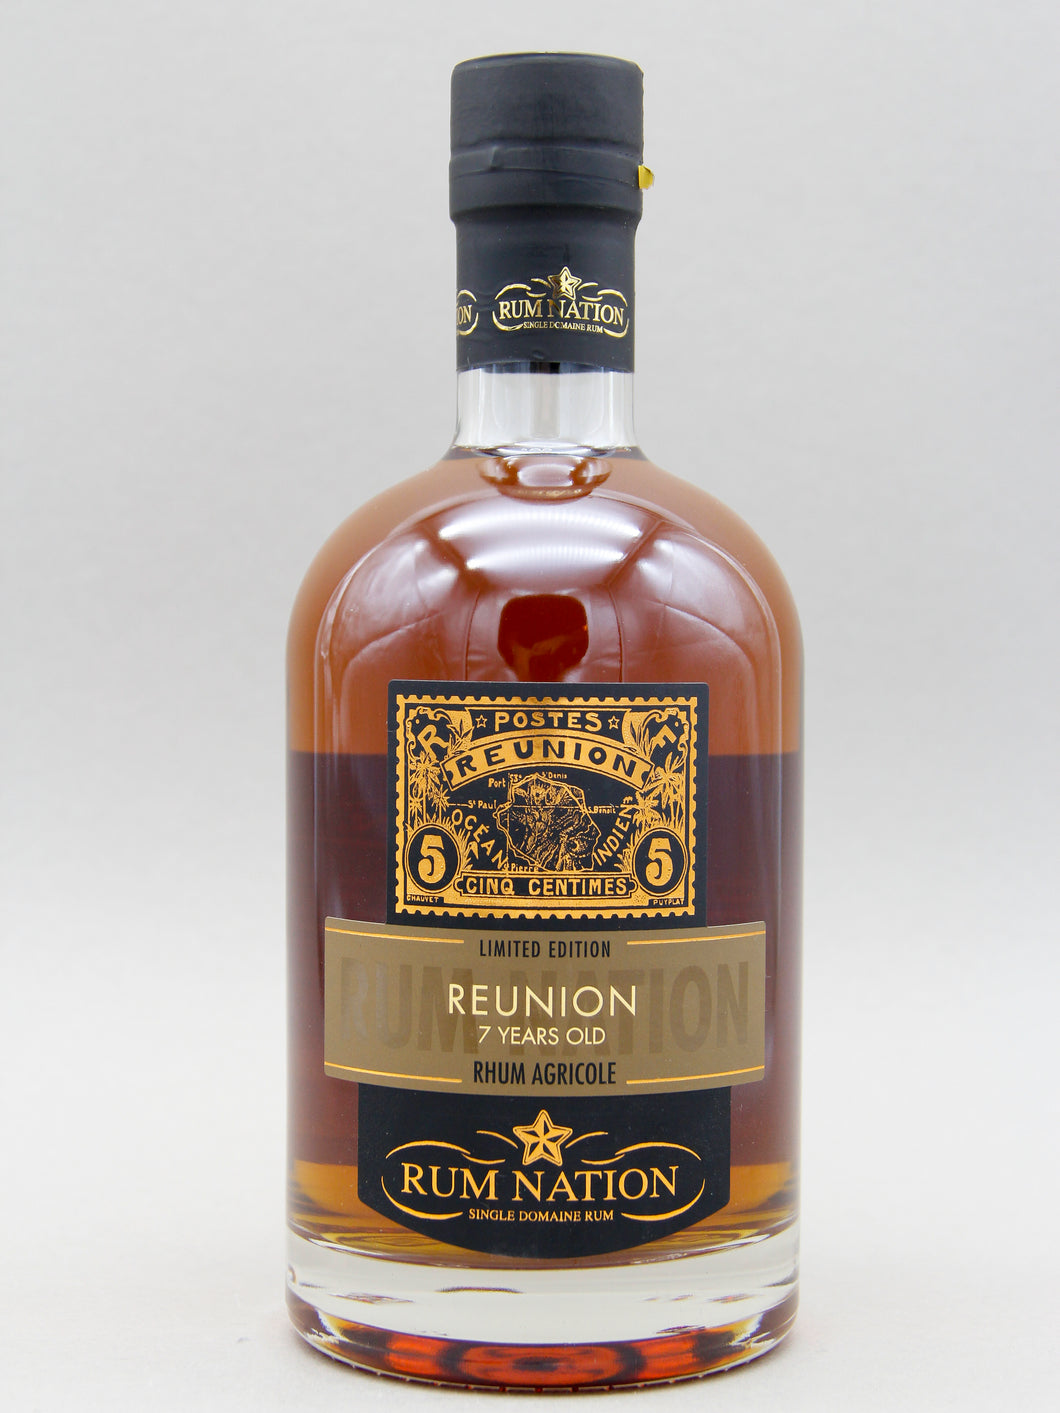 Rum Nation, Réunion, 7 Years Old, Rhum Agricole (45%, 70cl)